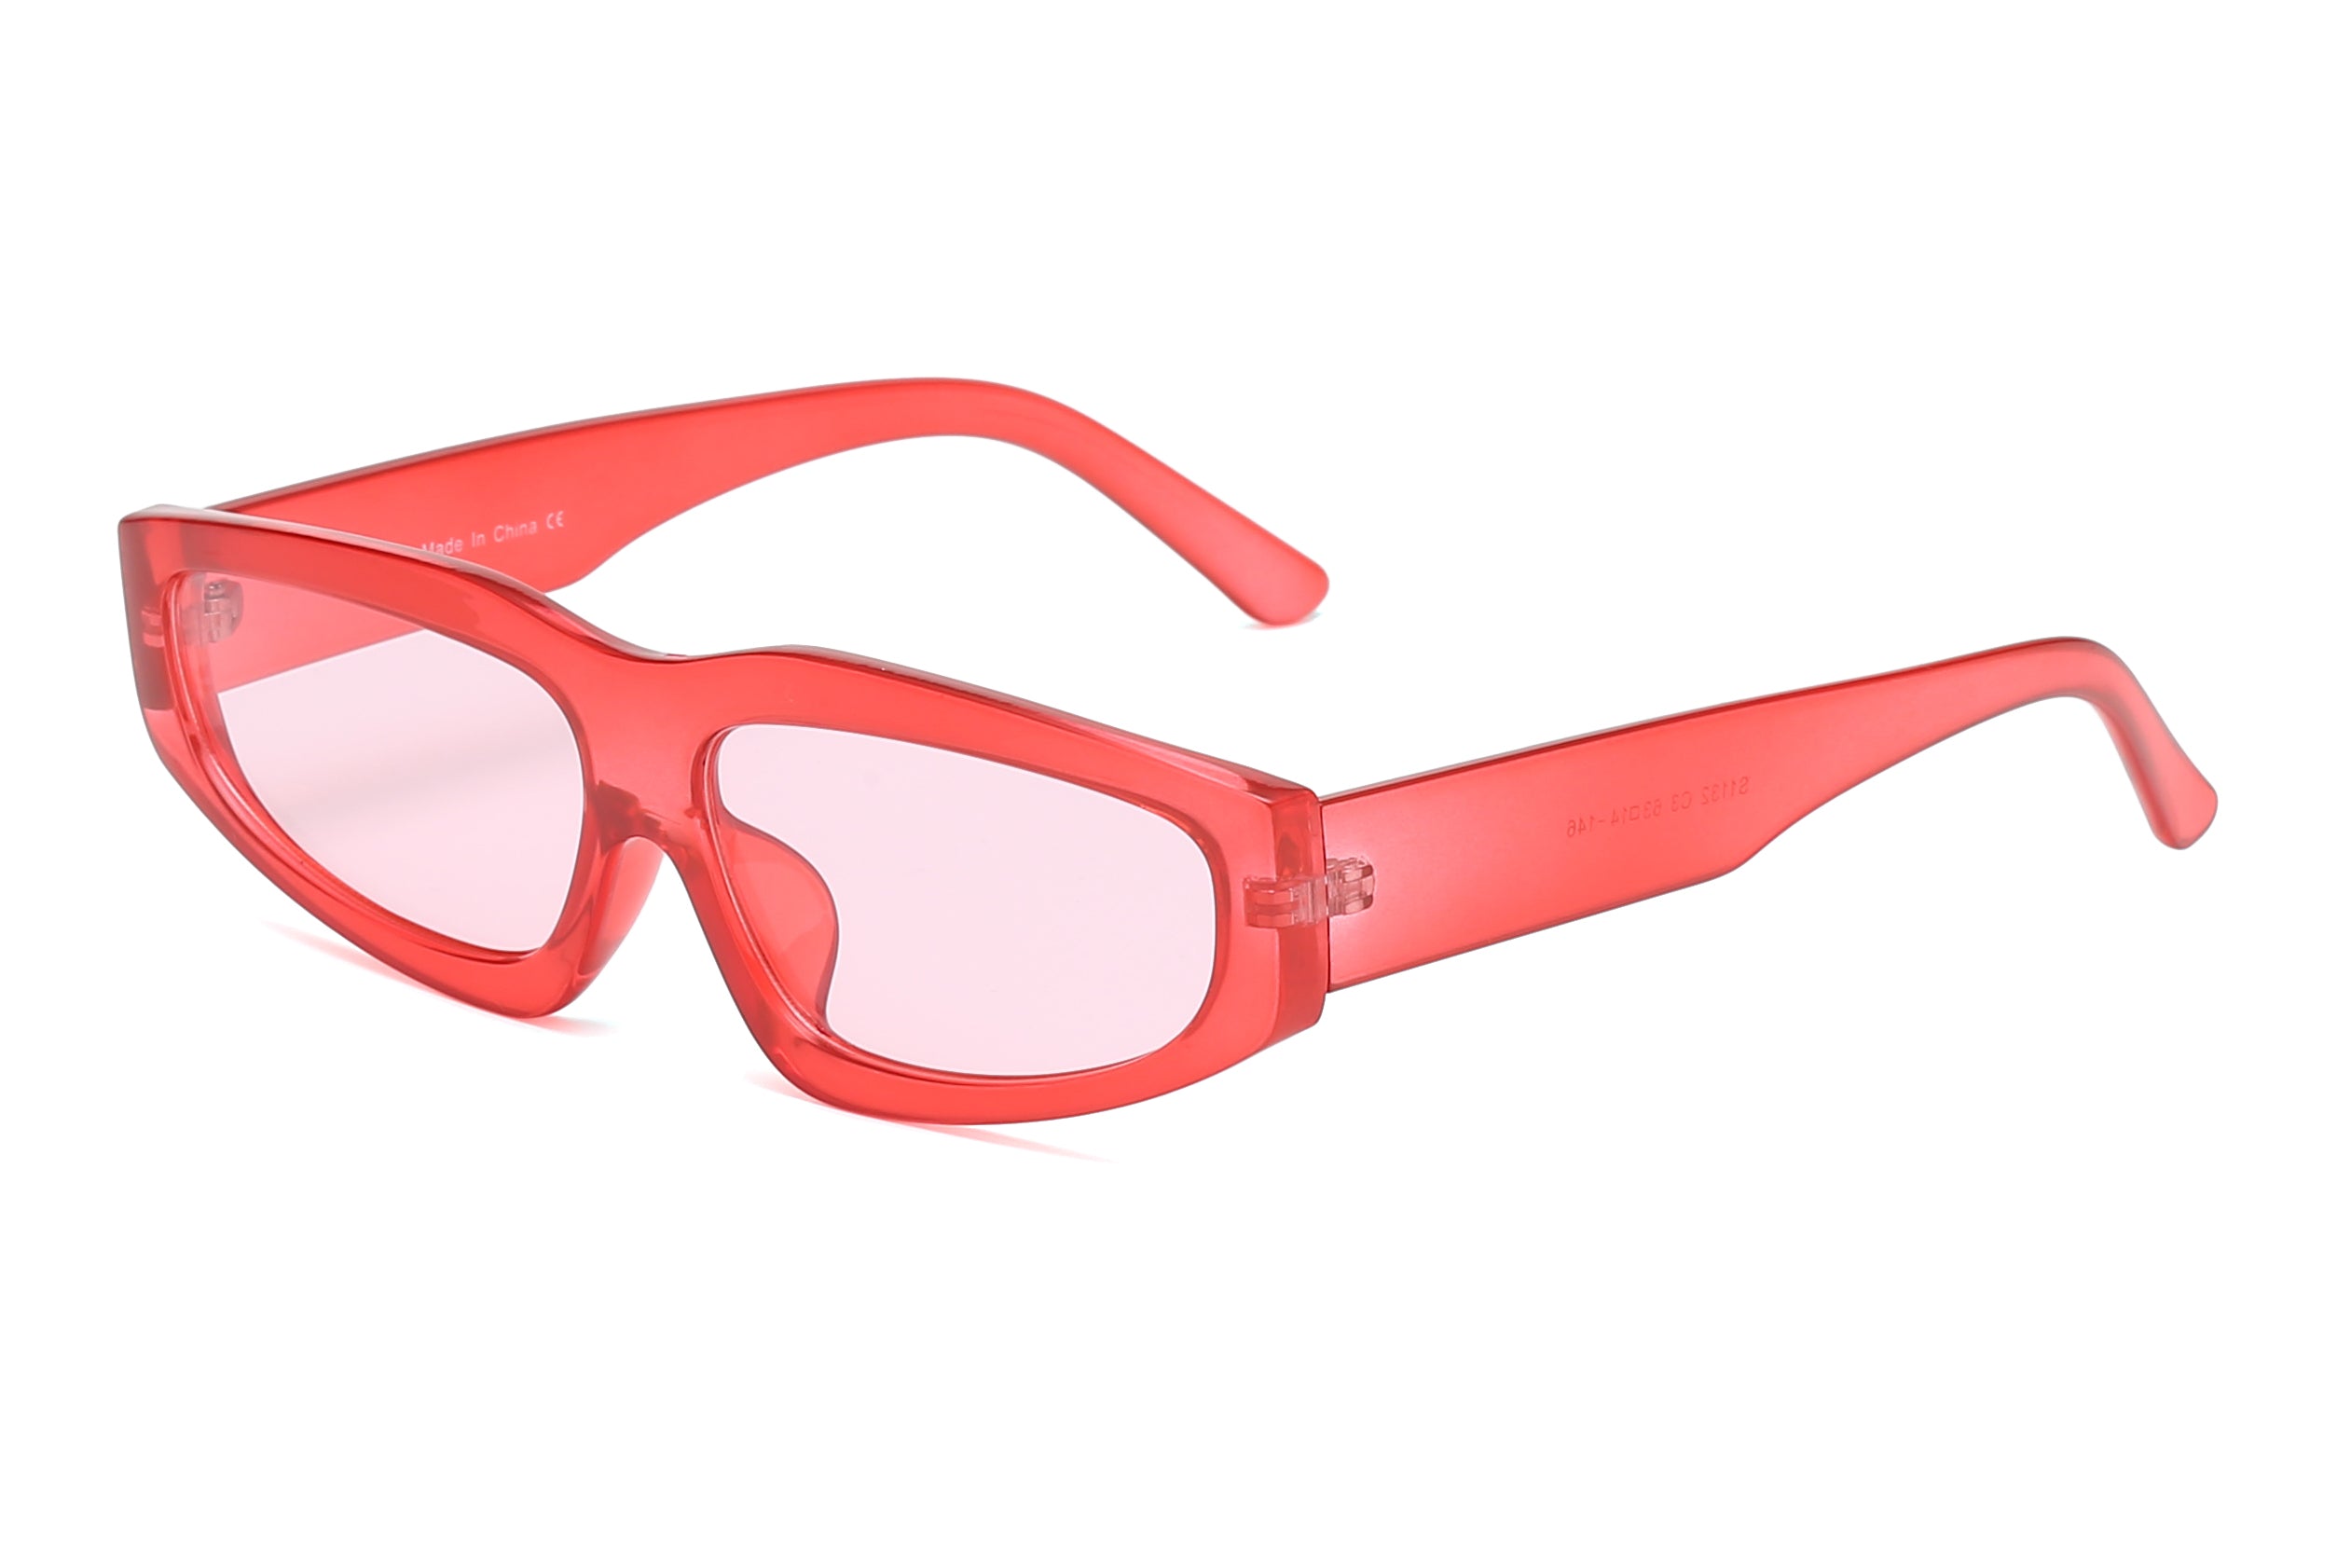 Casey Square Sunglasses  Urban Outfitters Mexico - Clothing